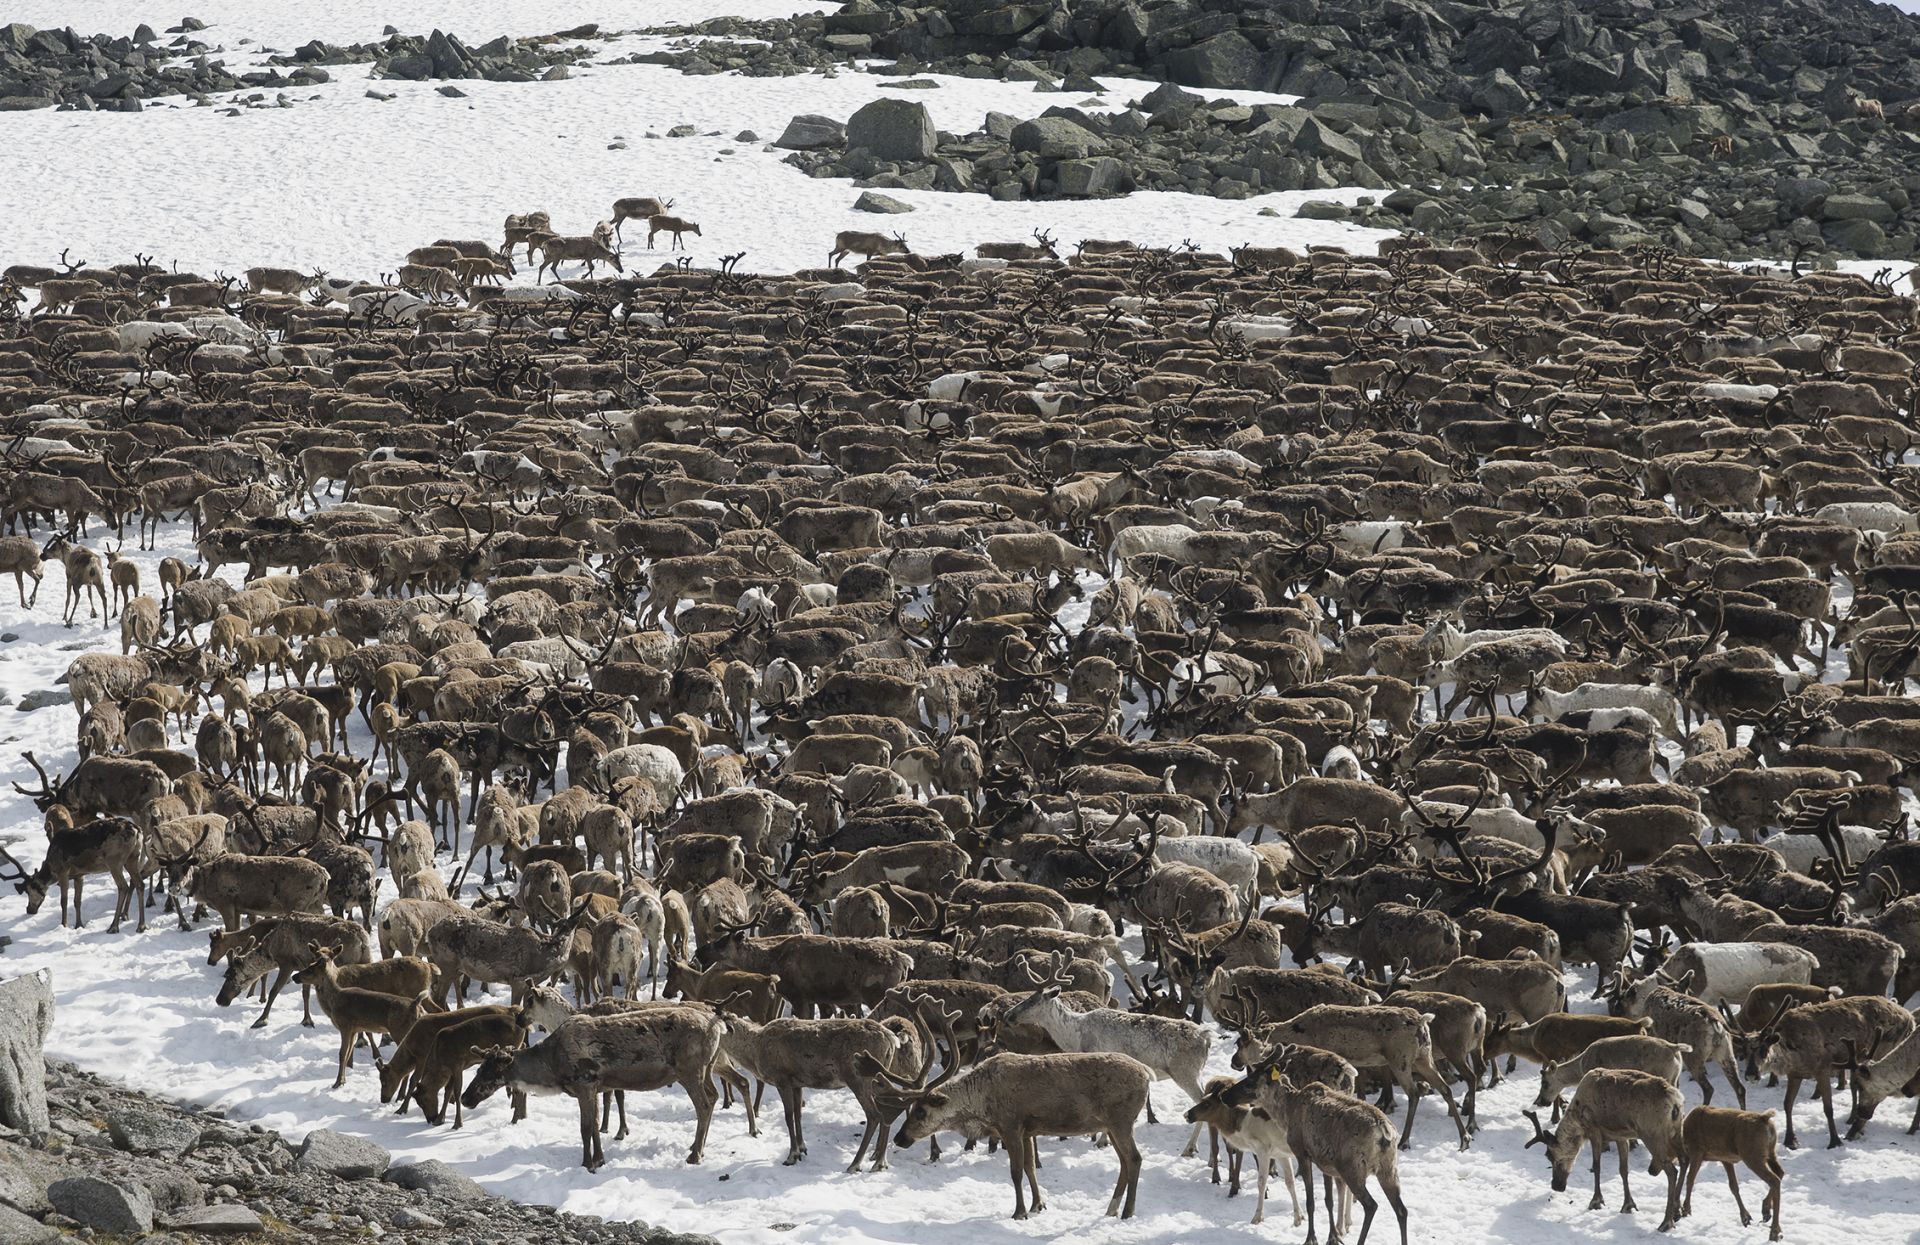 How many deer are in one herd?